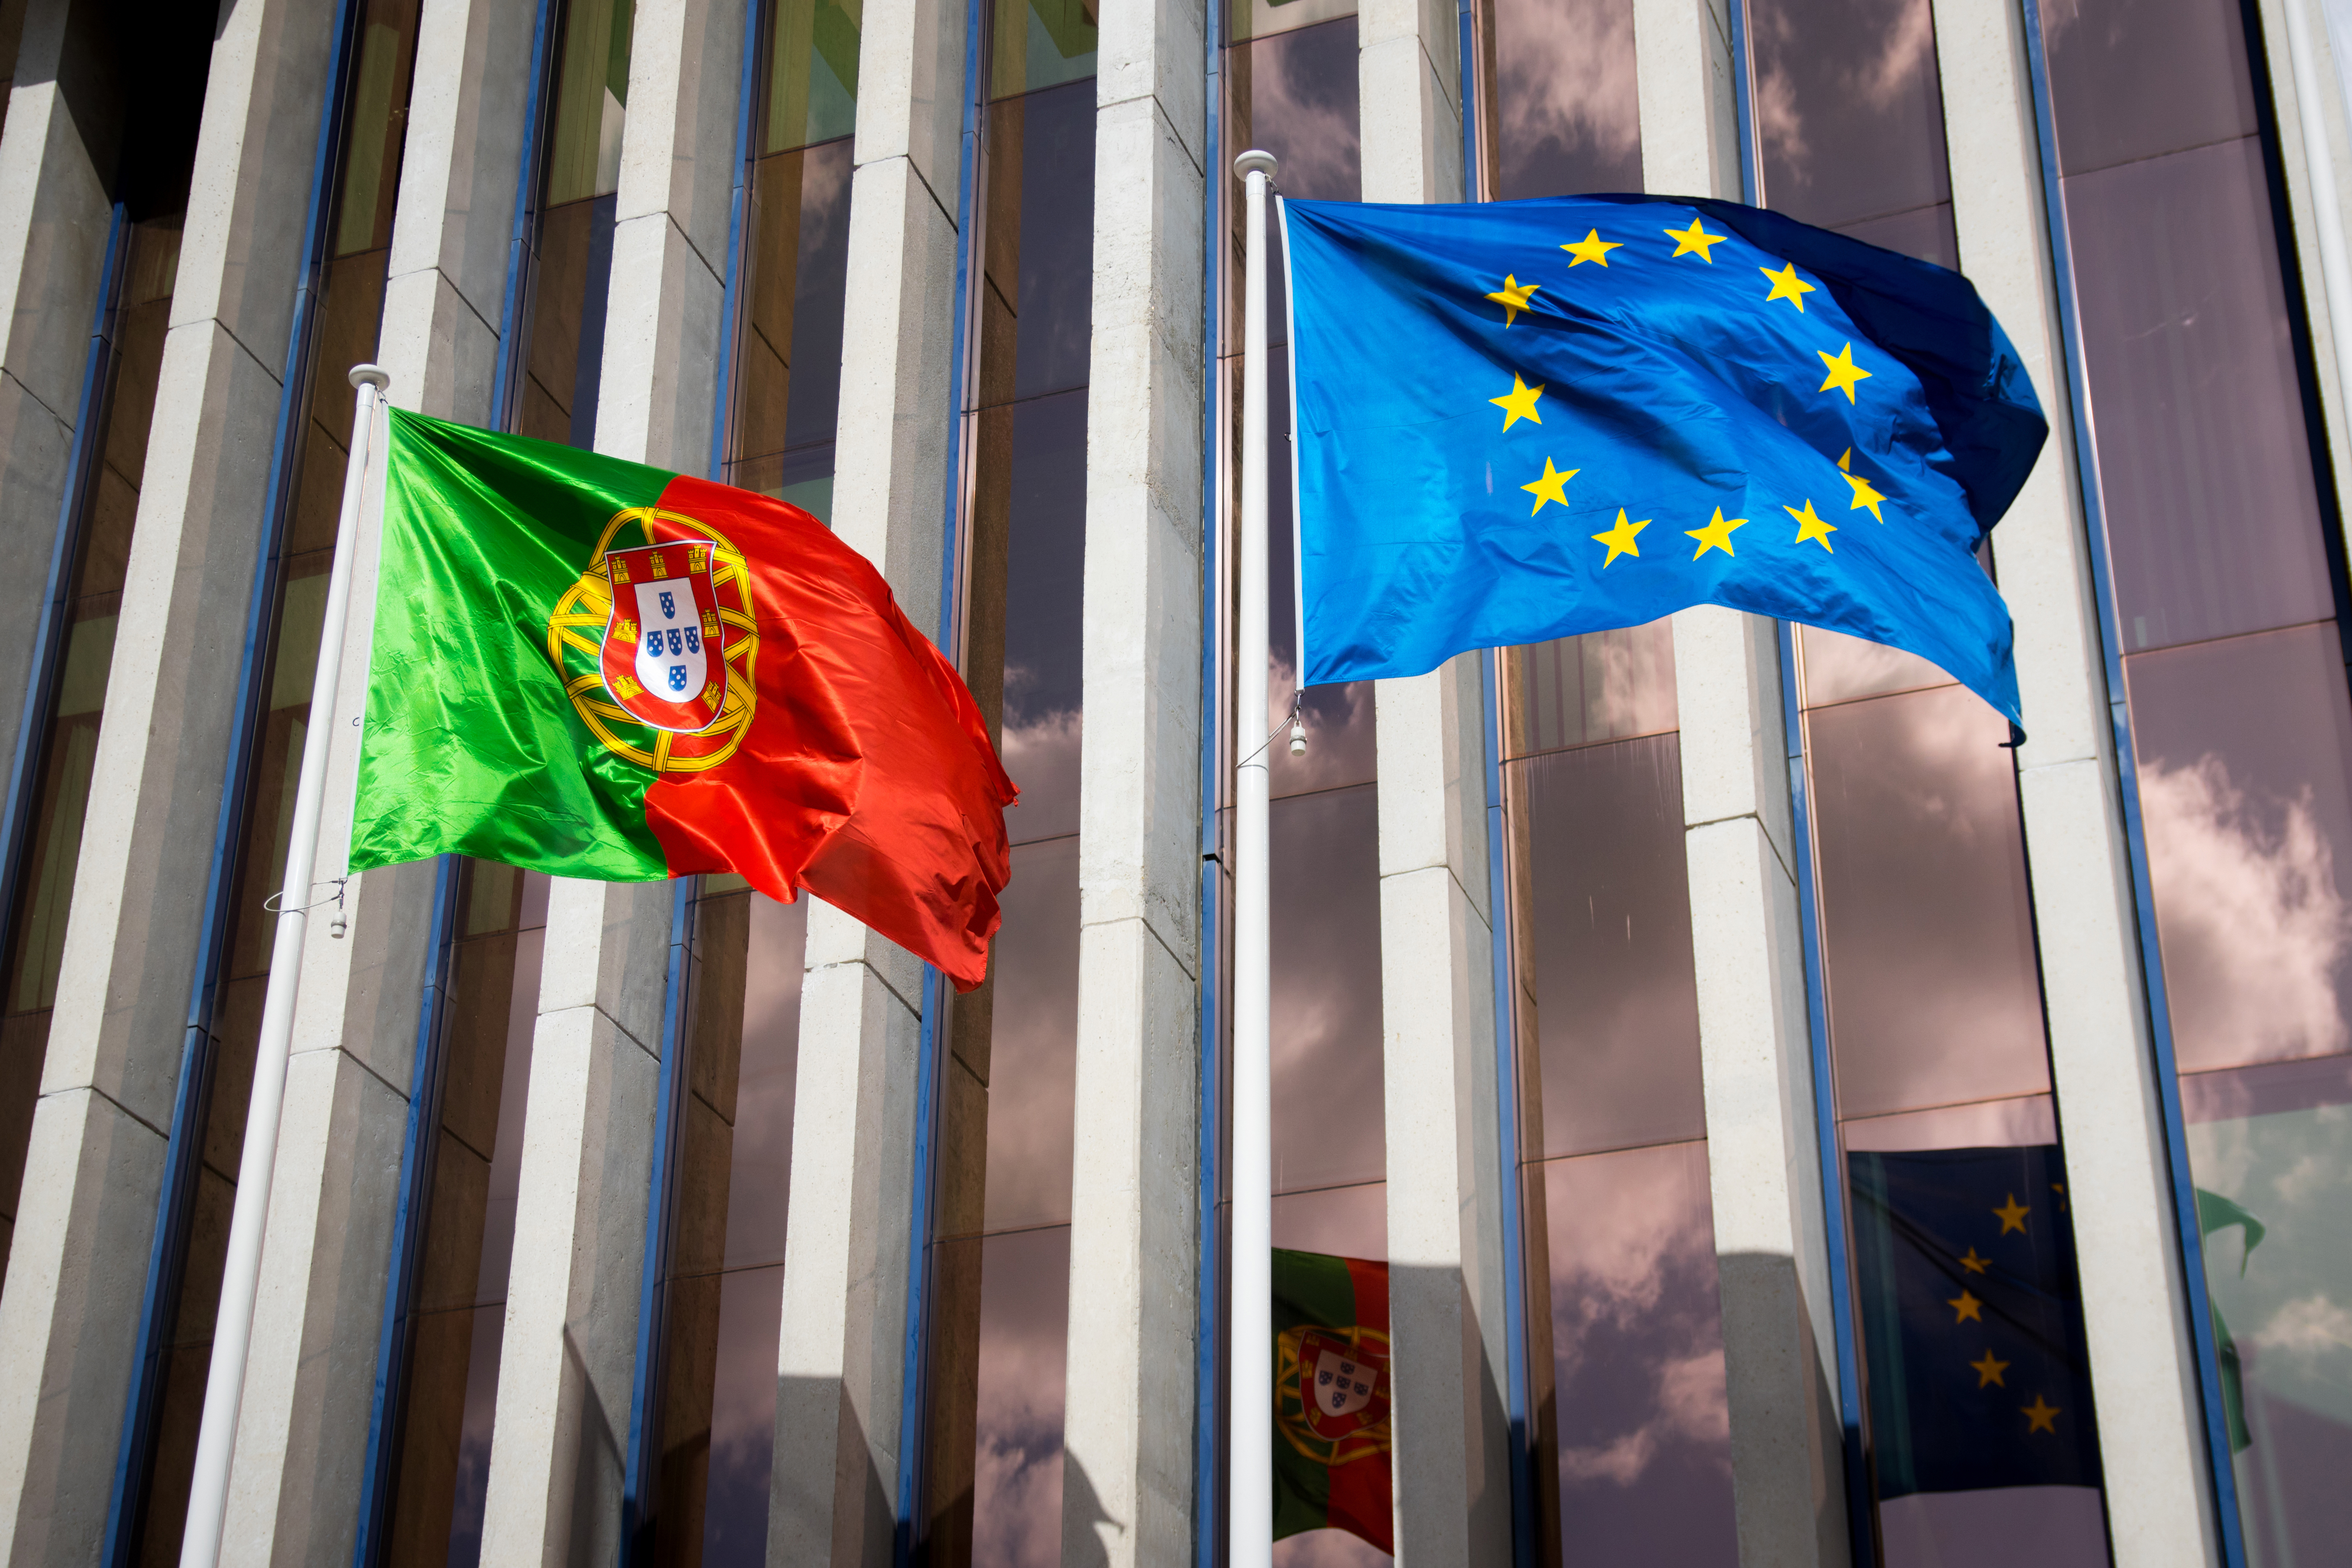 Flags symbolizing the citizenship or residence permit of Portugal, a European state